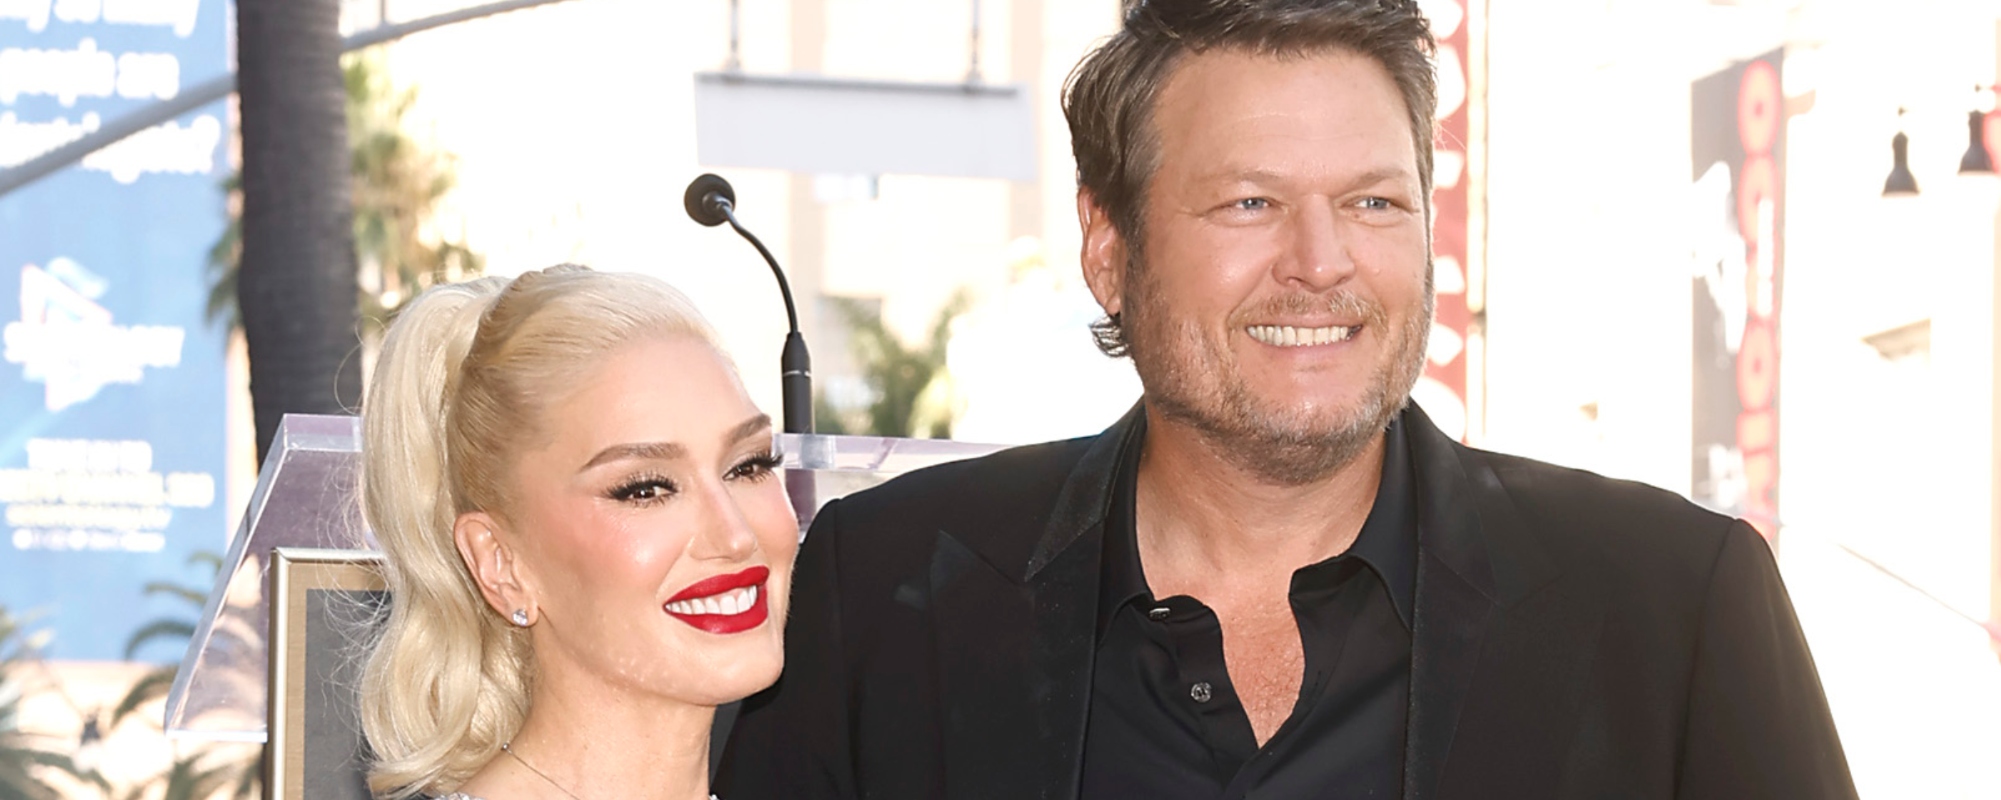 Watch Devoted Husband Blake Shelton Flaunt His Green Thumb for Wife Gwen Stefani’s Passion Project